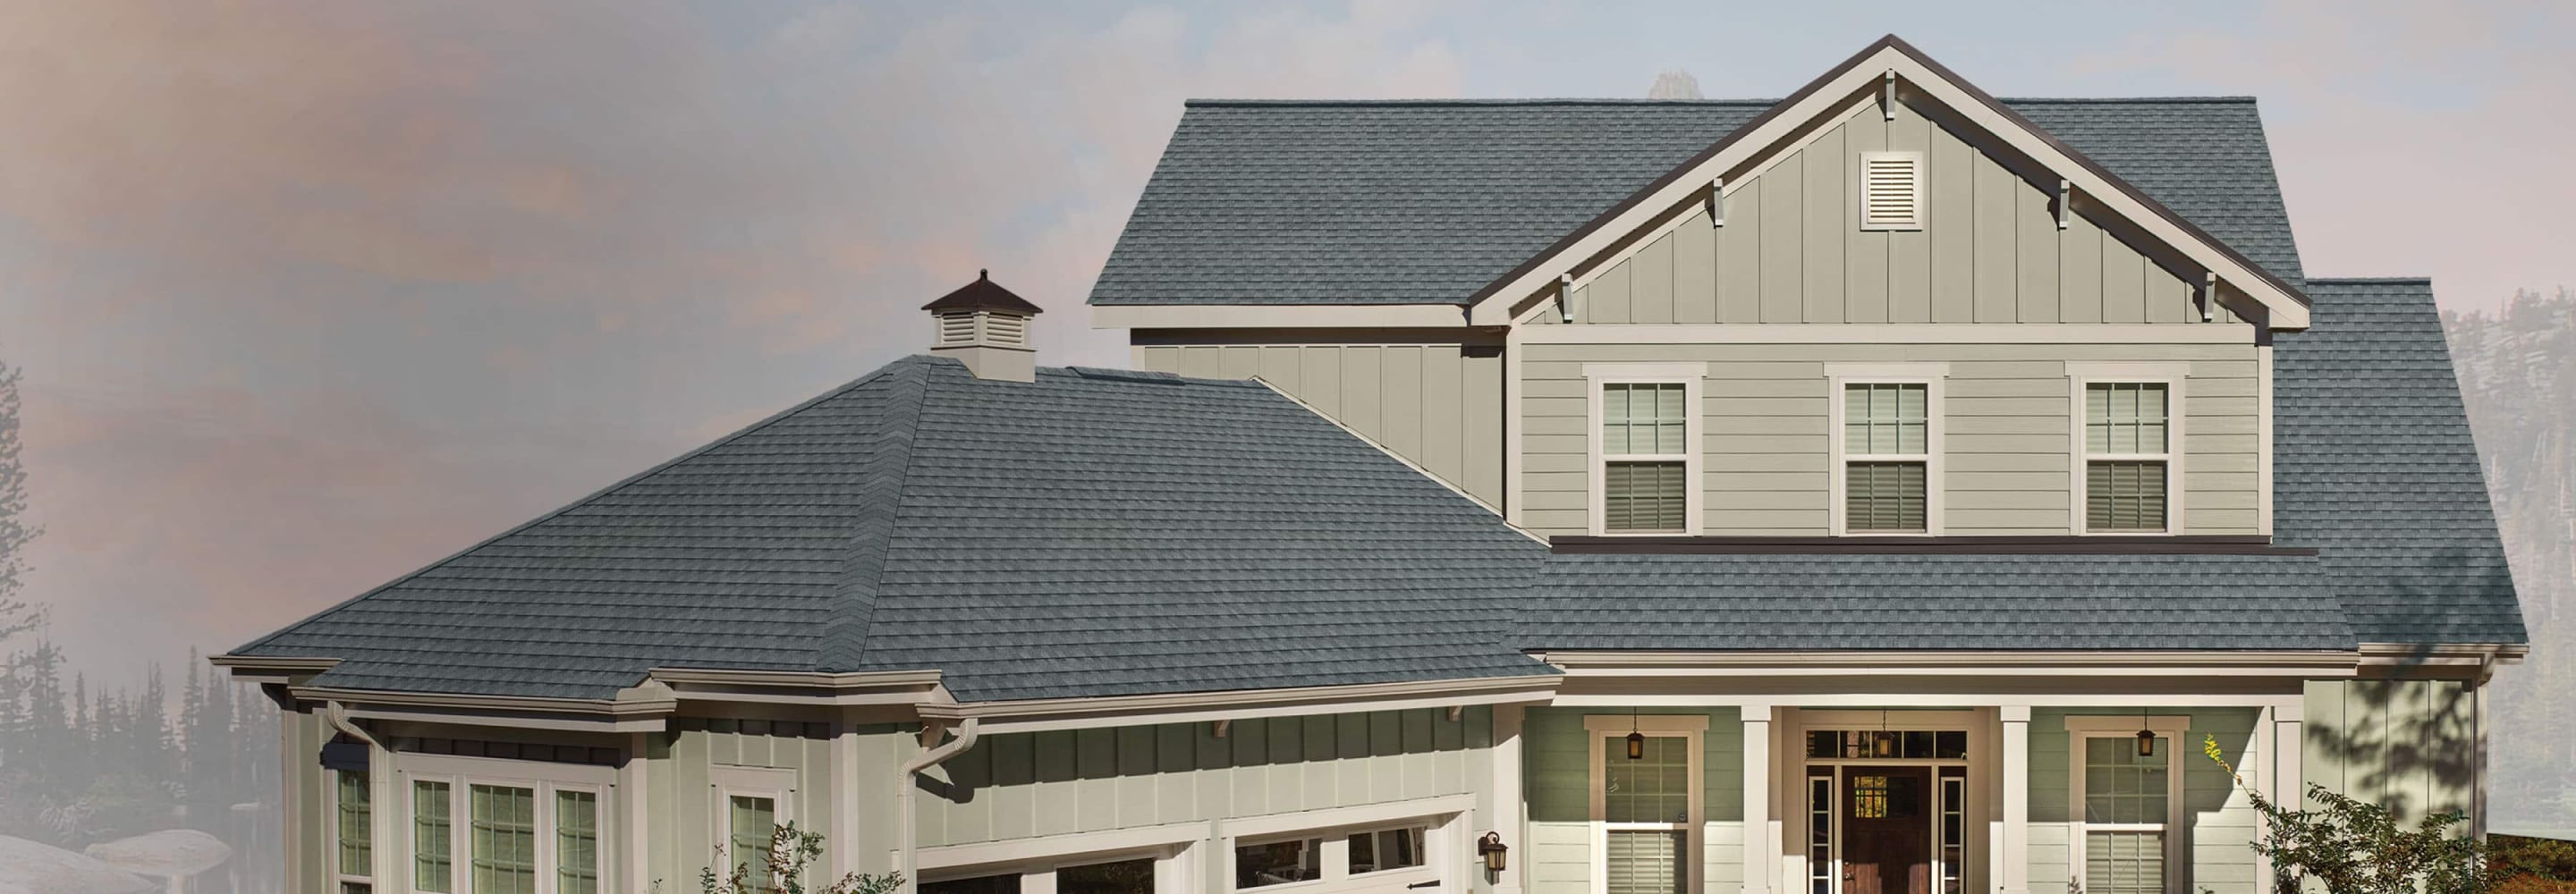 Home with gray roof shingles